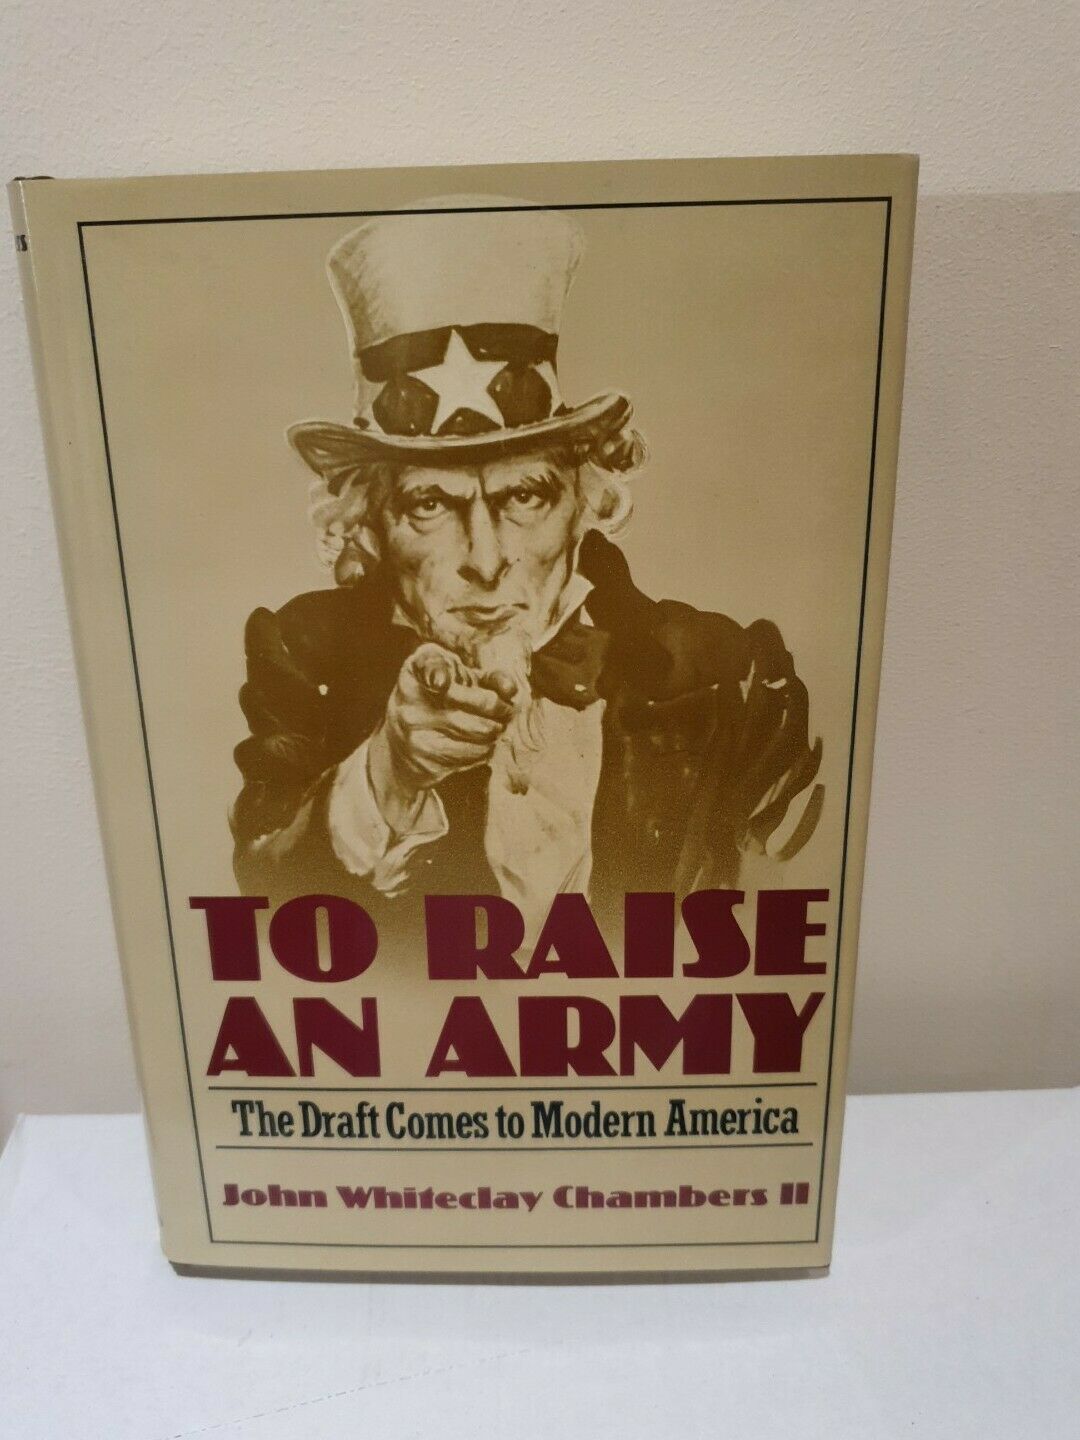 SIGNED To Raise an Army by John Whiteclay Chambers II